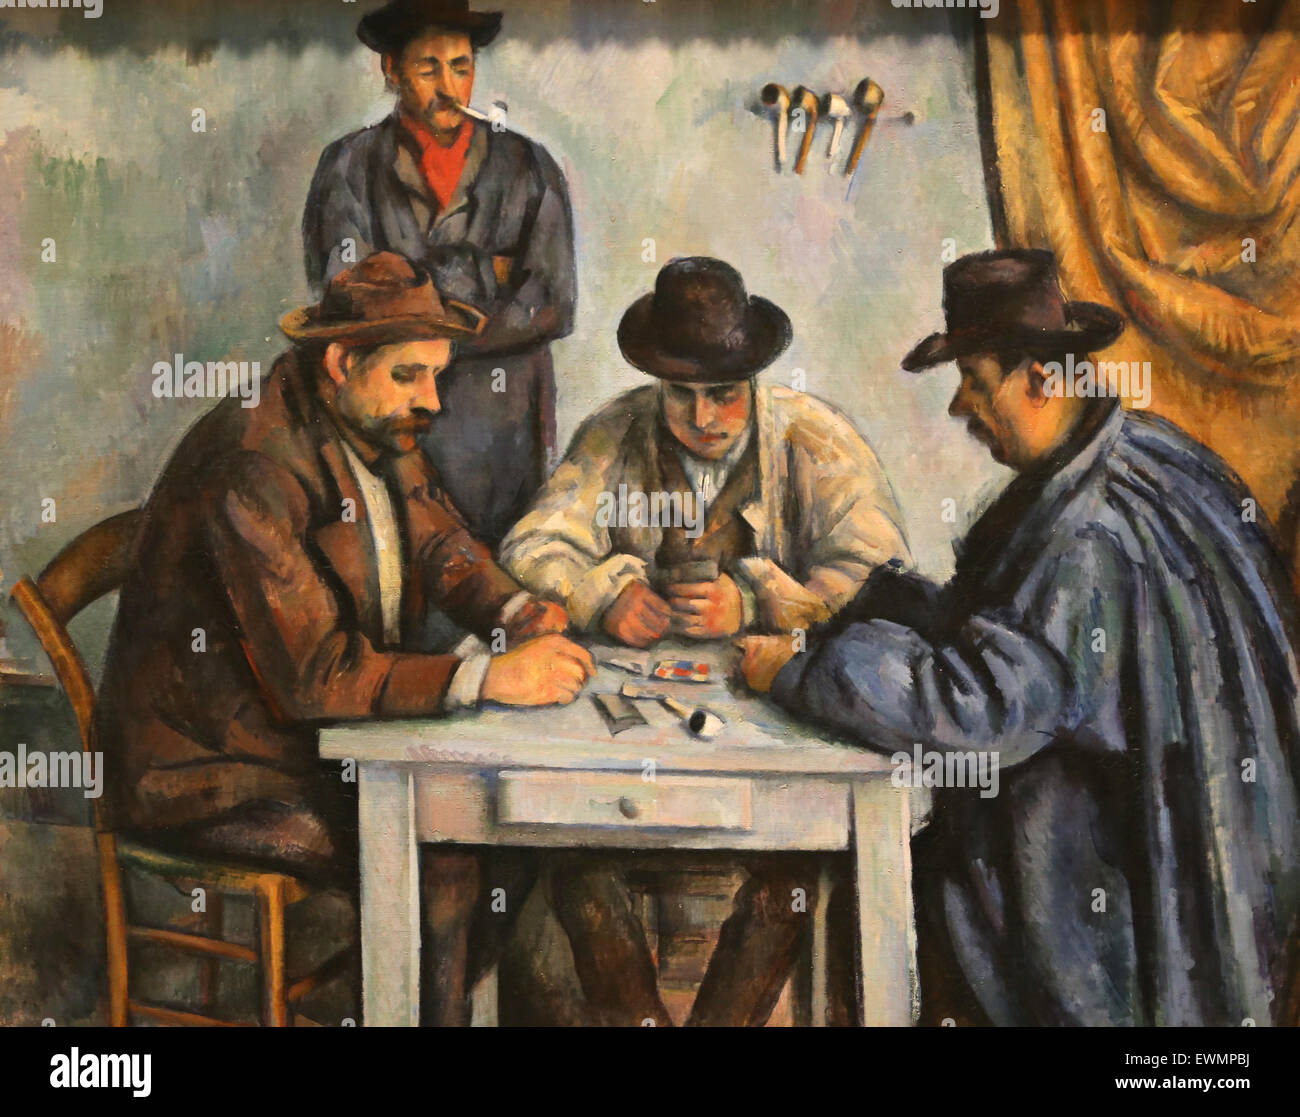 Paul Cezanne (1839-1906).  French painter. The Card Players, 1880-92. Oil on canvas. Metropolitan Museum of Art. Ny. USA. Stock Photo